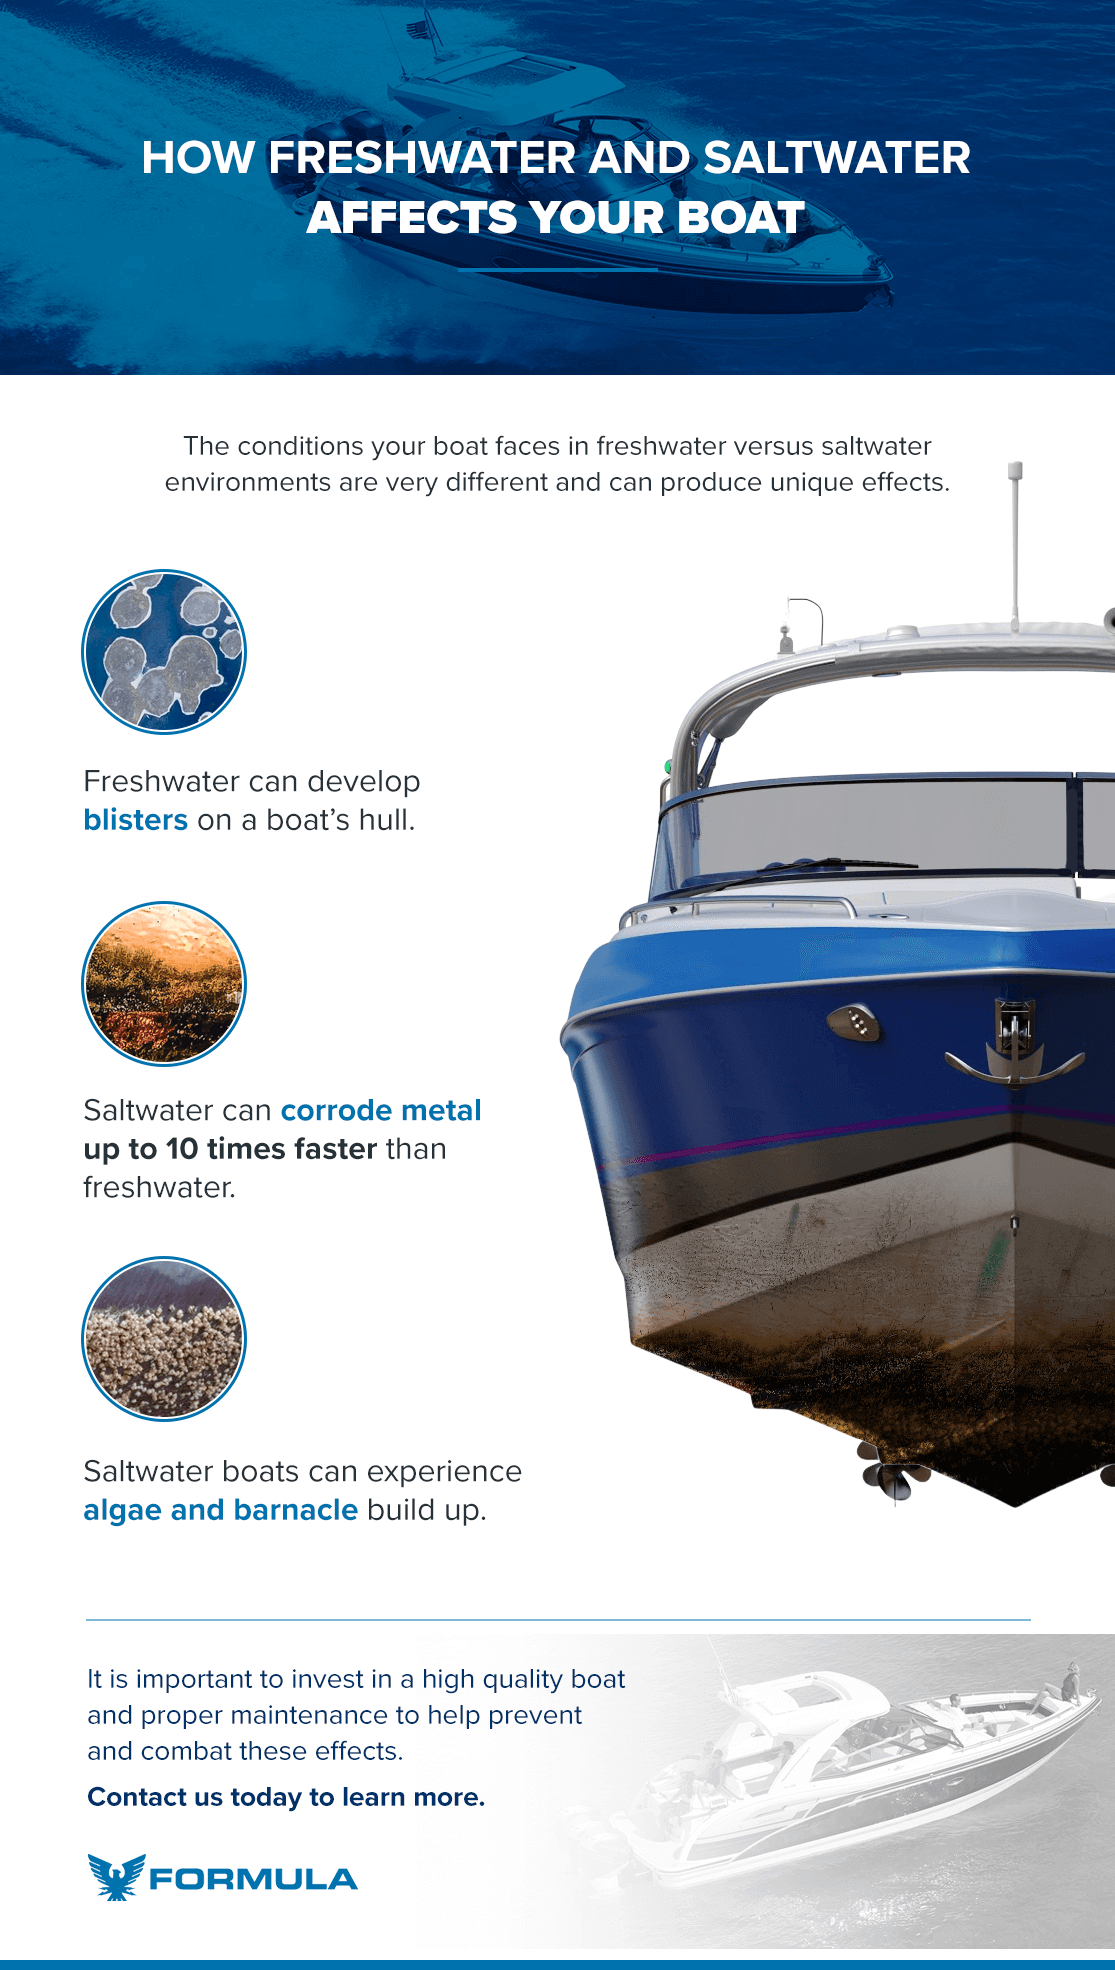 How Freshwater And Saltwater Affects Your Boat